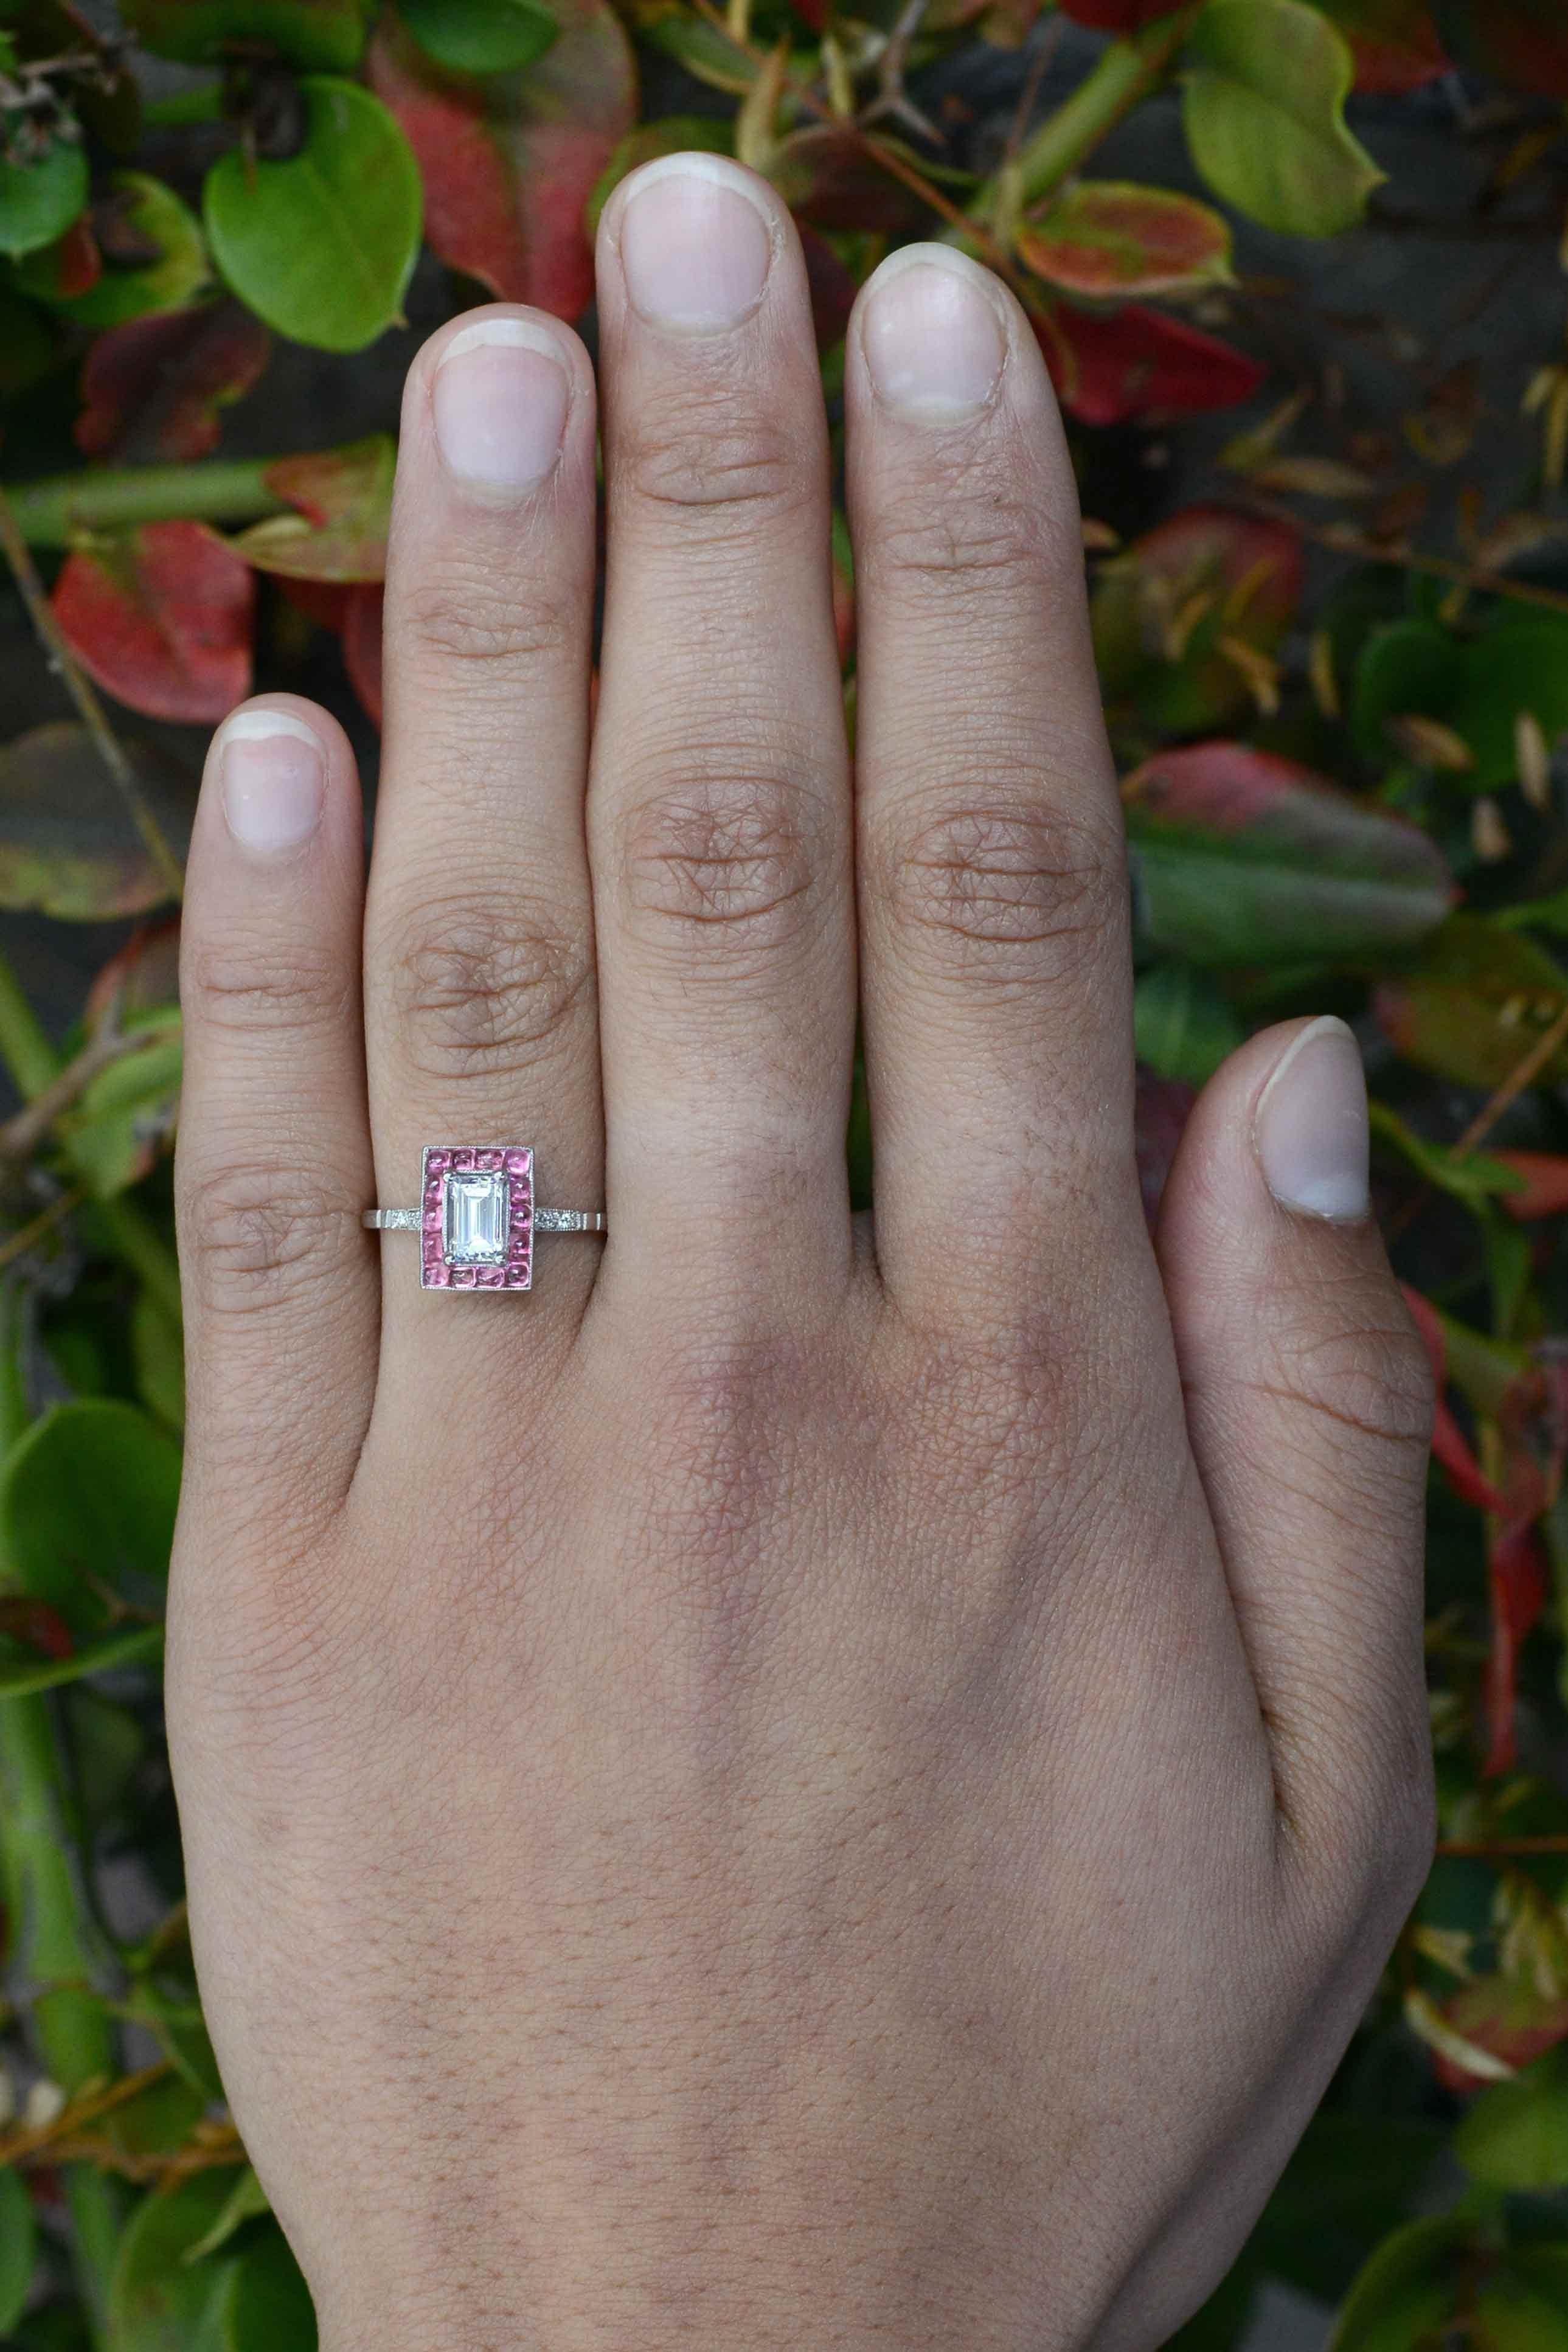 An unforgettable emerald cut diamond Art Deco style engagement ring centered by a dazzling 3/4 carat step cut with exceptional clarity and brilliance. Smartly surrounded by a halo of 14 of the cutest pink sapphire cabochons that lend an elegant